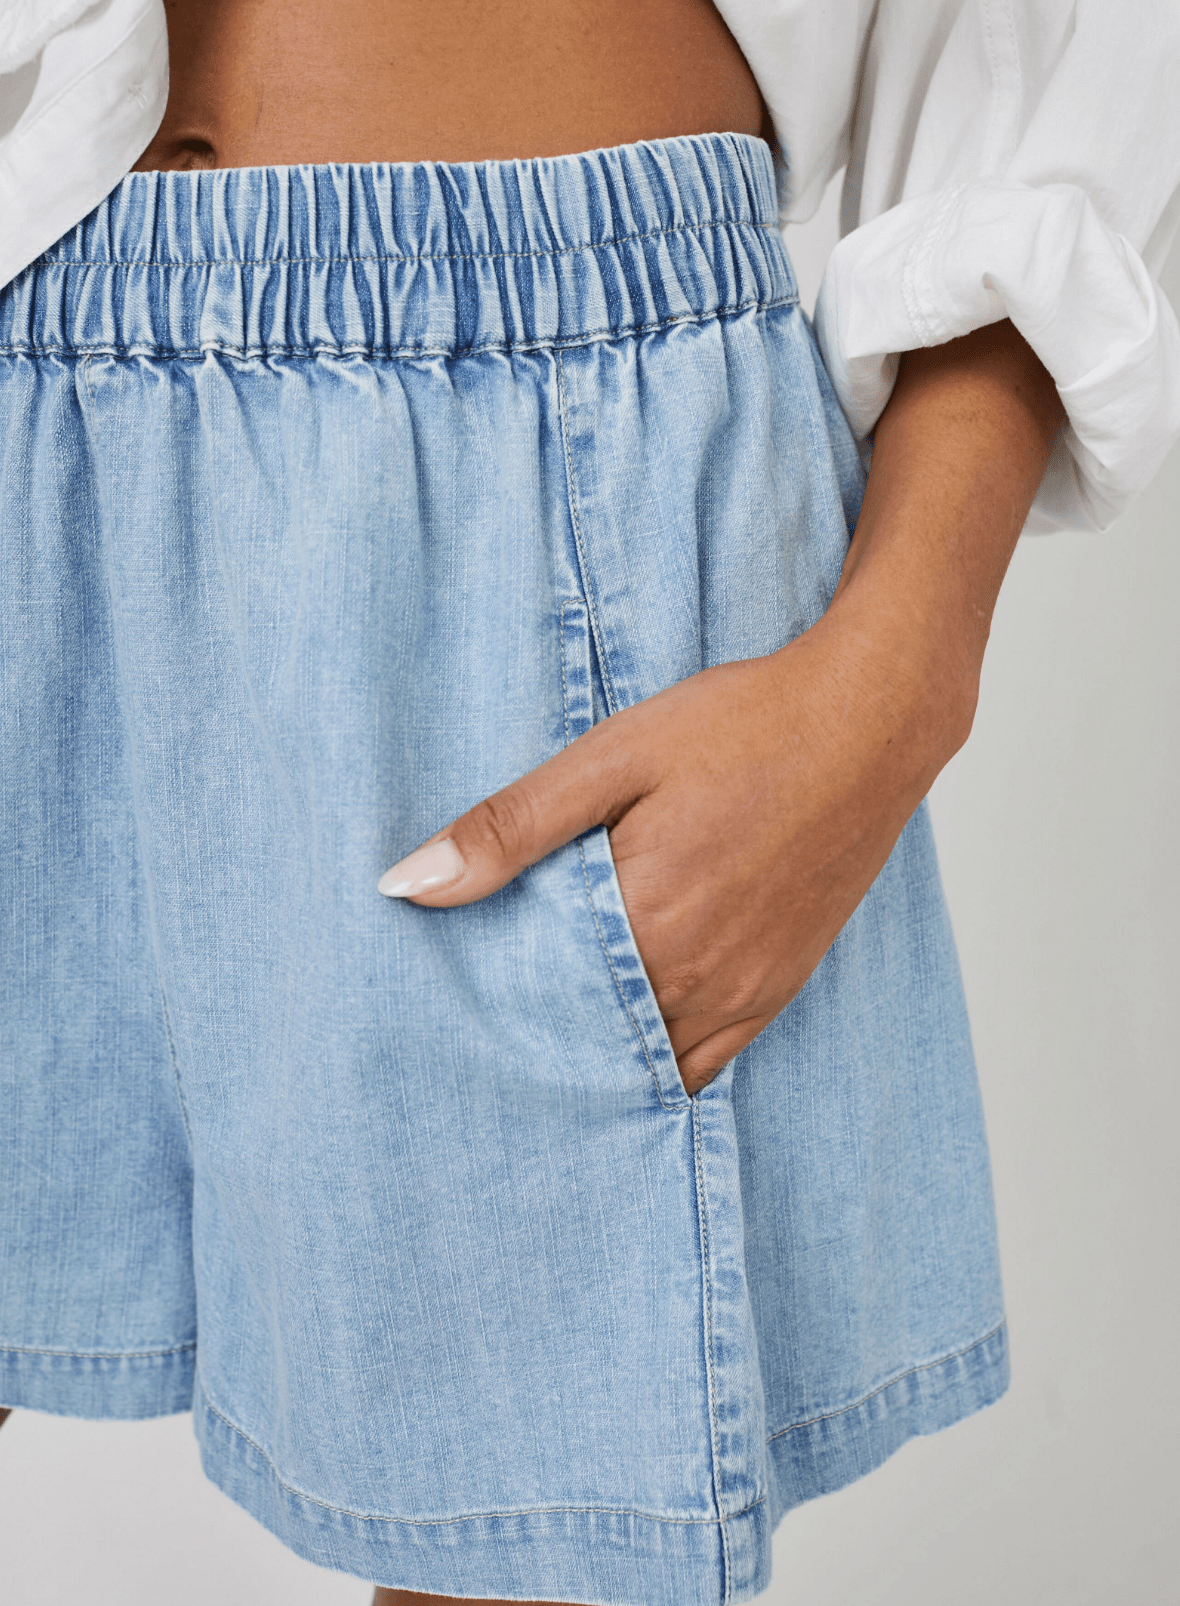 GET FREE CHAMBRAY PULL ON by Free People